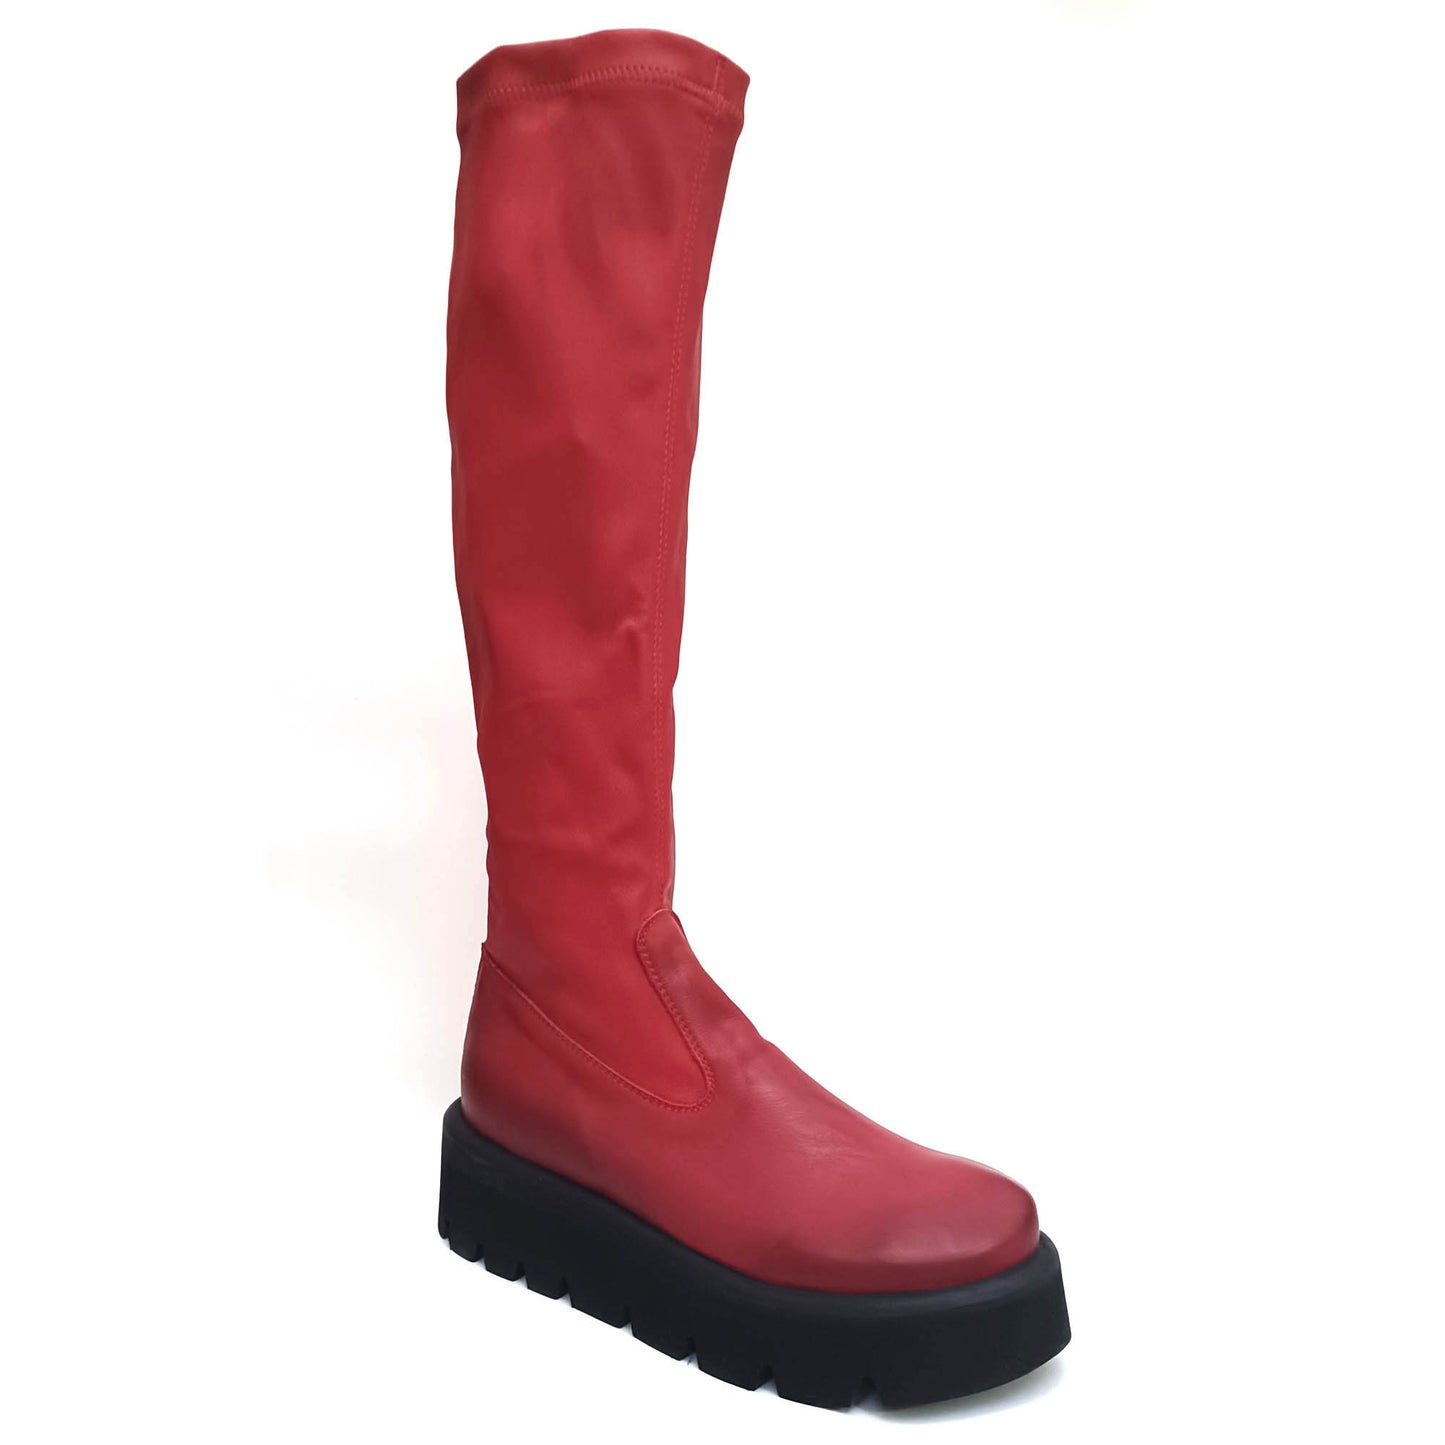 Red stretch leather boots